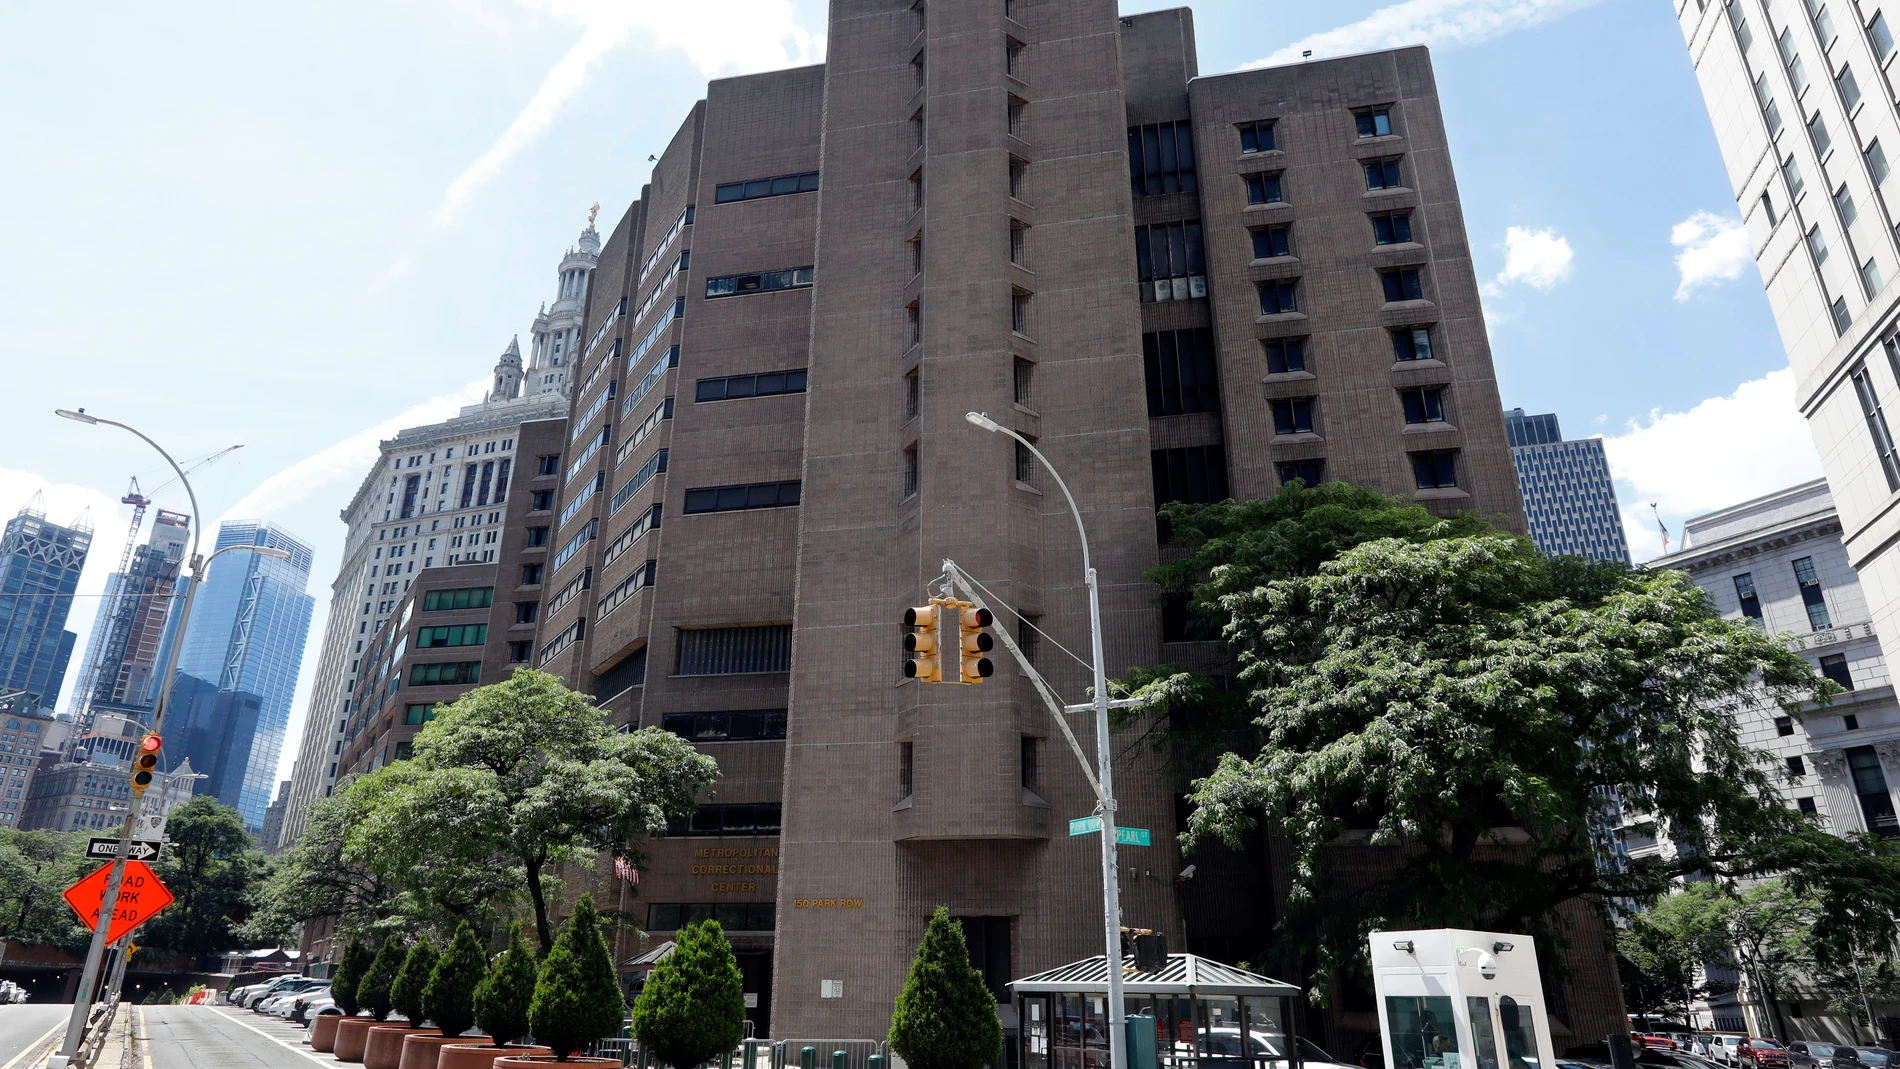 FILE - The Manhattan Correctional Center appears in this July 1, 2019 photo, in New York. New York Mayor Eric Adams' administration suggested in a letter, to New York Gov. Kathy Hochul on Aug. 9, 2023, that it wants to house migrants in a notorious federal jail that was closed after disgraced financier Jeffrey Epstein's suicide there led to its squalid conditions being deemed unsafe for humans. (AP Photo/Richard Drew, File)